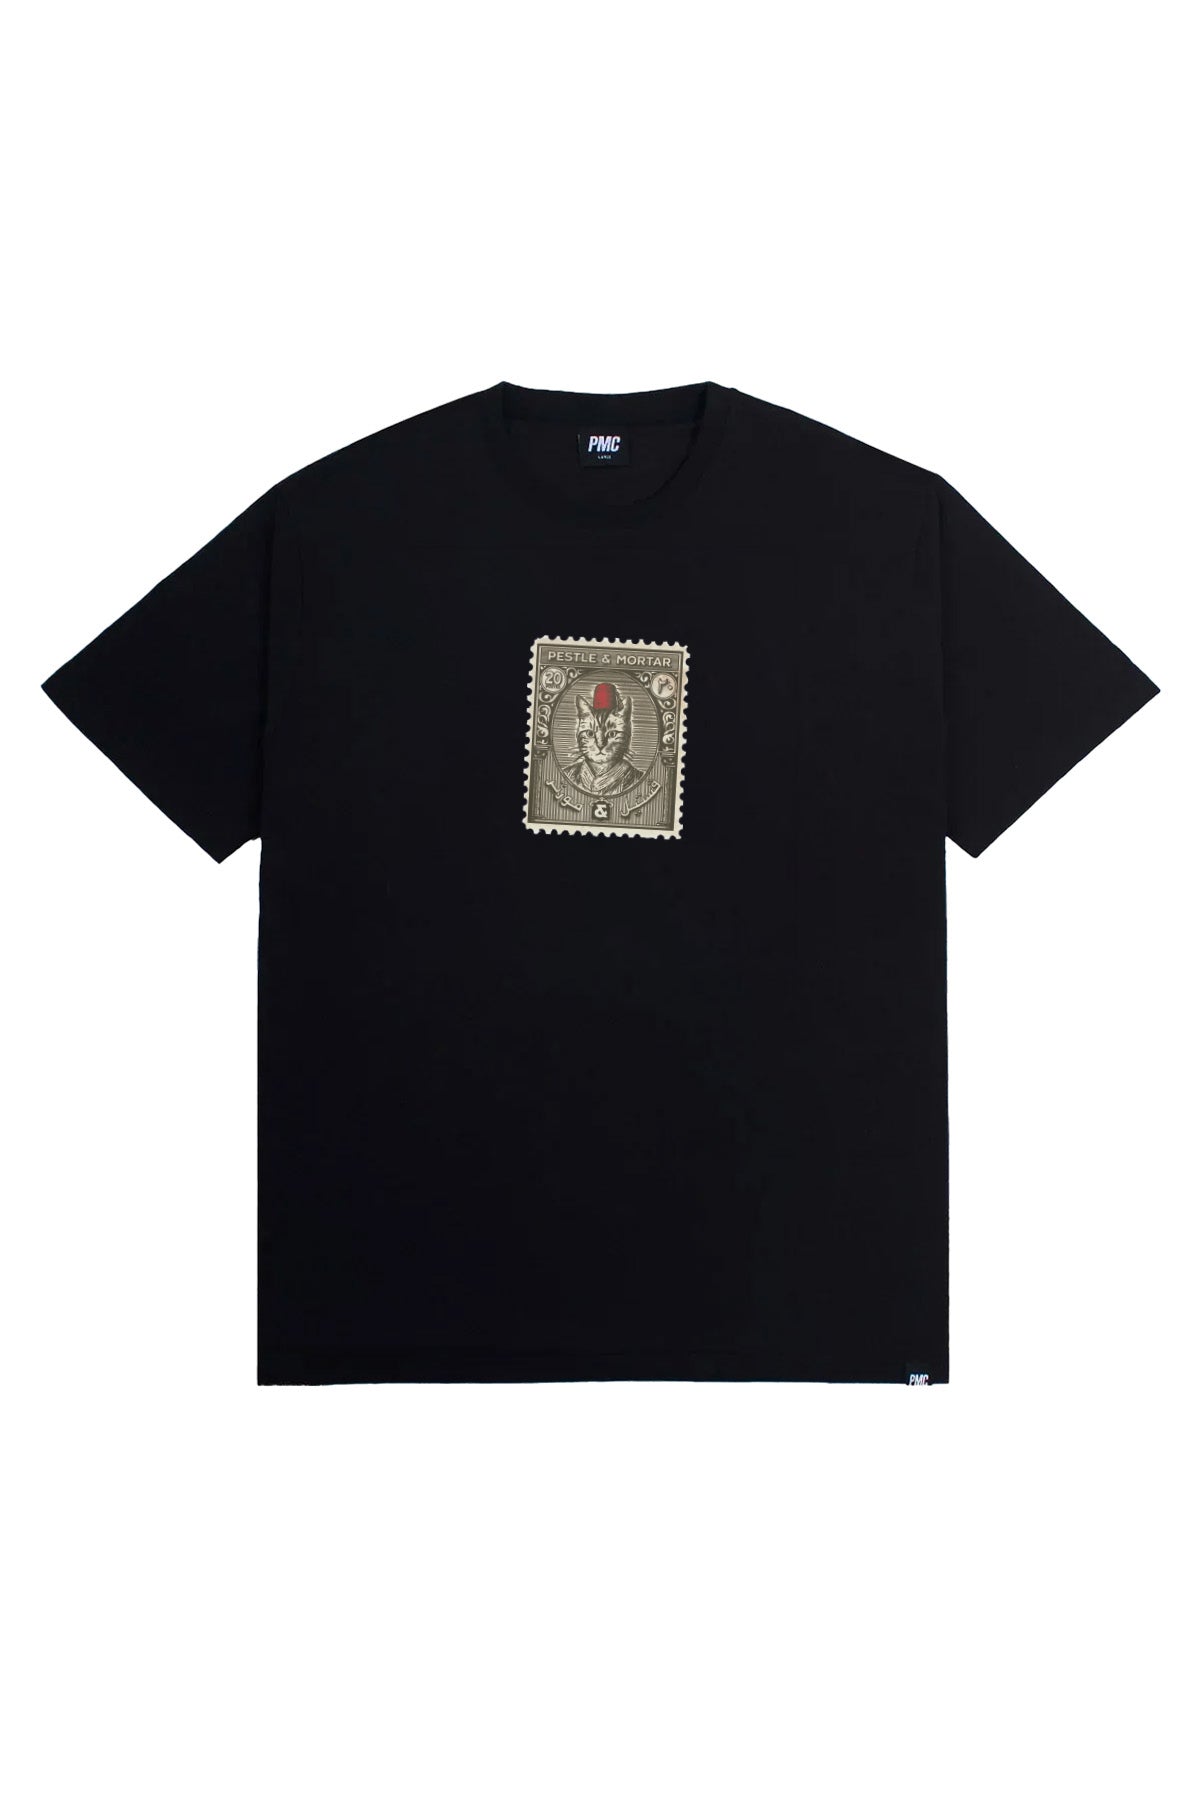 Meowroccan Stamp Tee Black